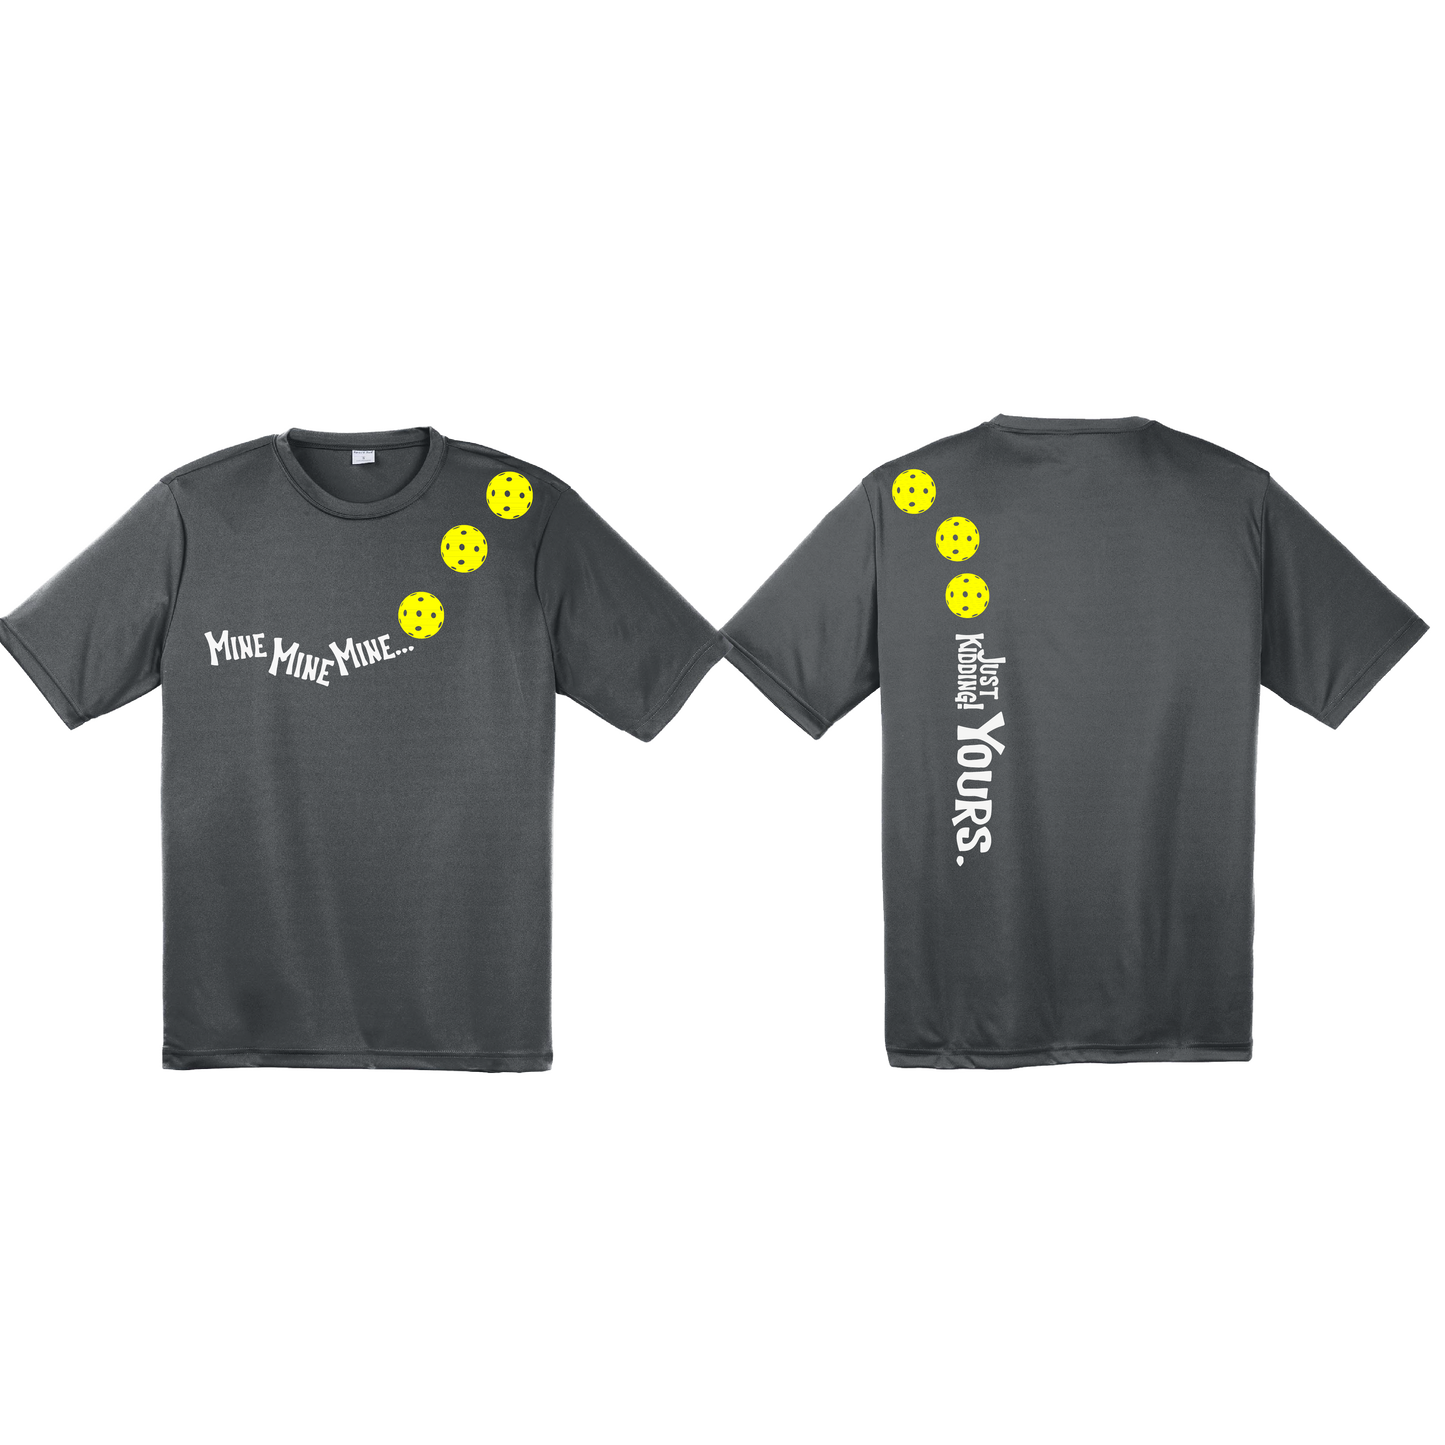 Mine JK Yours (Pickleball Colors Orange Yellow or Red) | Men's Short Sleeve Athletic Shirt | 100% Polyester